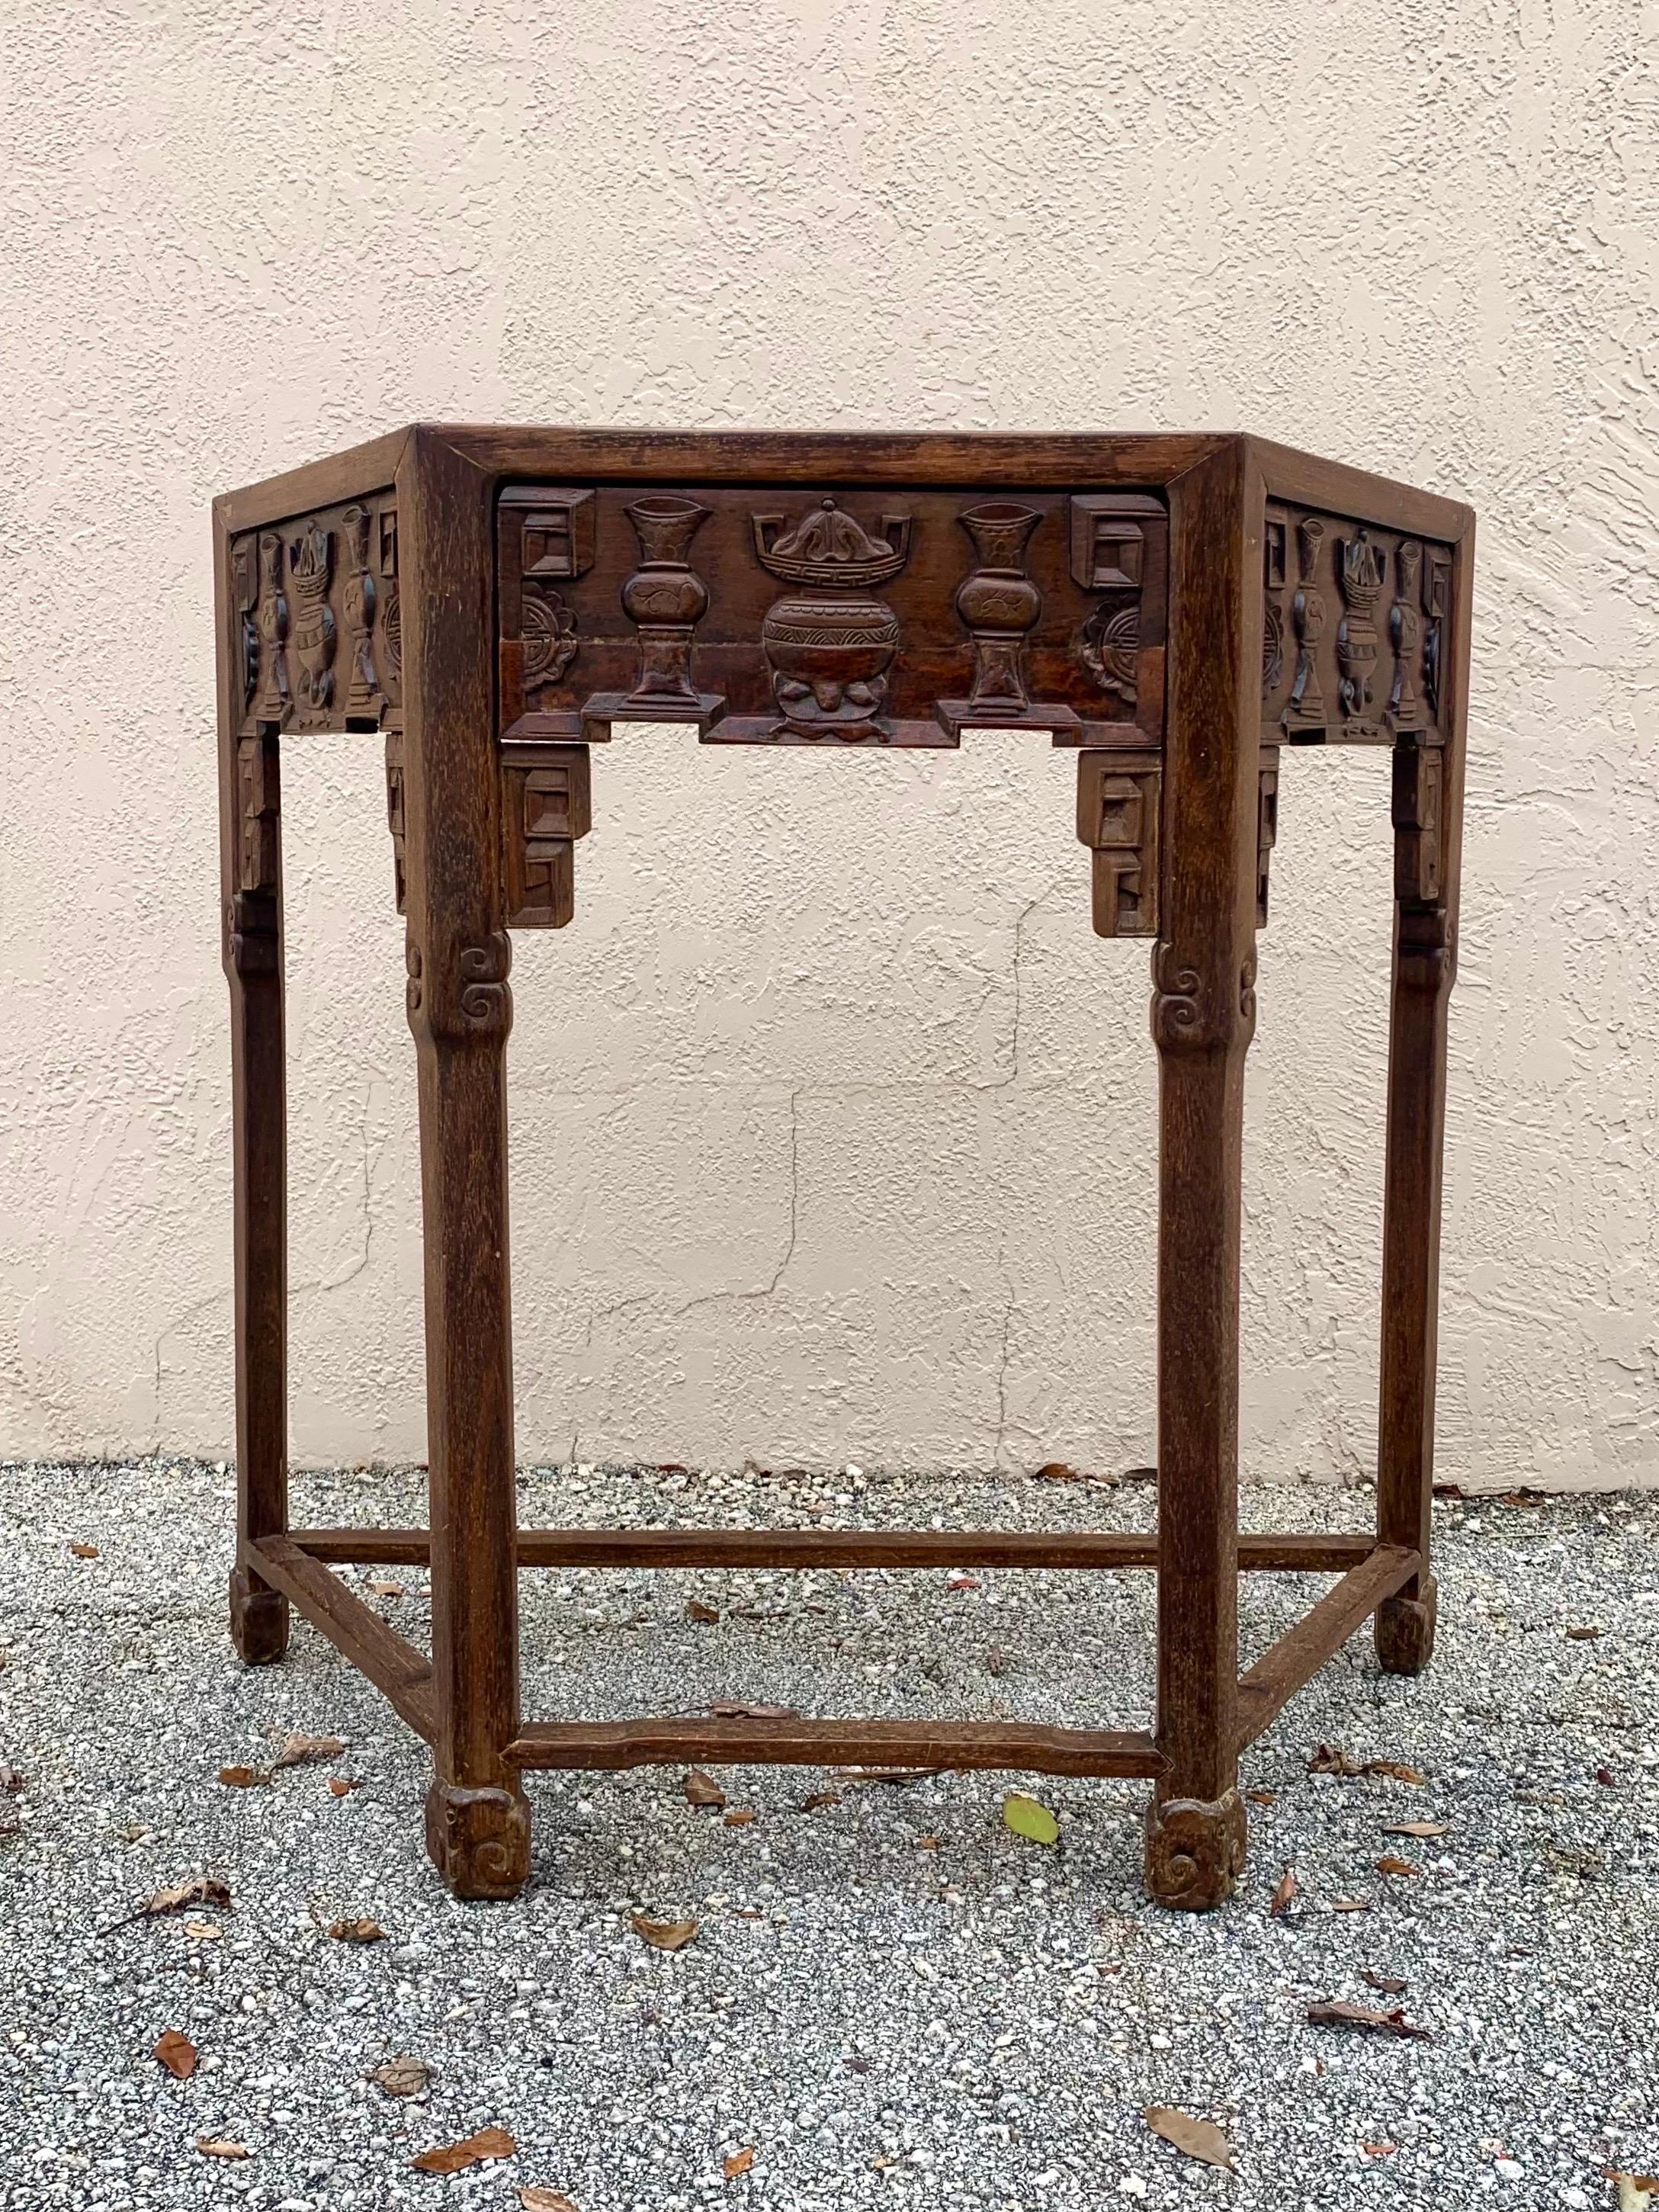 Beautiful hand carved Chinese console table. 19th century or potentially earlier. Qing dynasty or Ming dynasty style. Likely haunghuali wood. Trapezoid table top with inset marble. Strong heavy wood beautifully and masterfully hand carved with vases